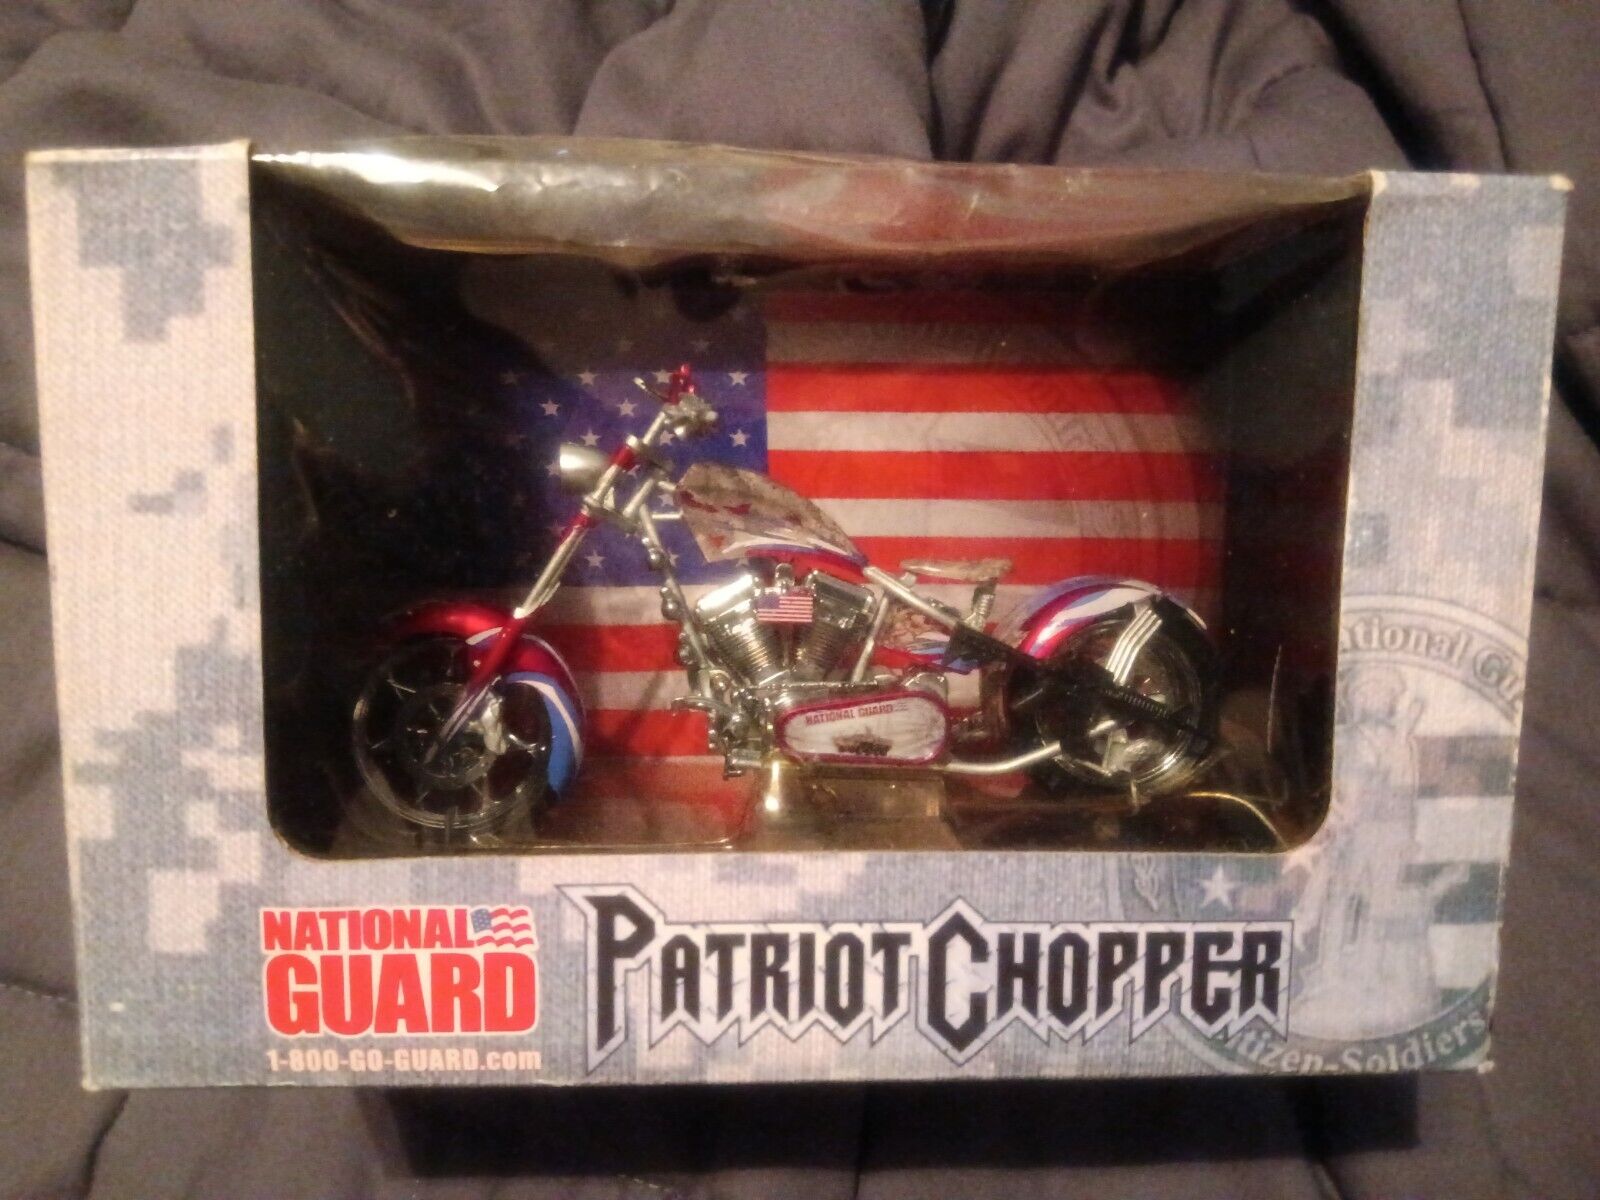 RARE Patriot Chopper Motorcycle Collectible 1:18 Scale National Guard New 2008🔵